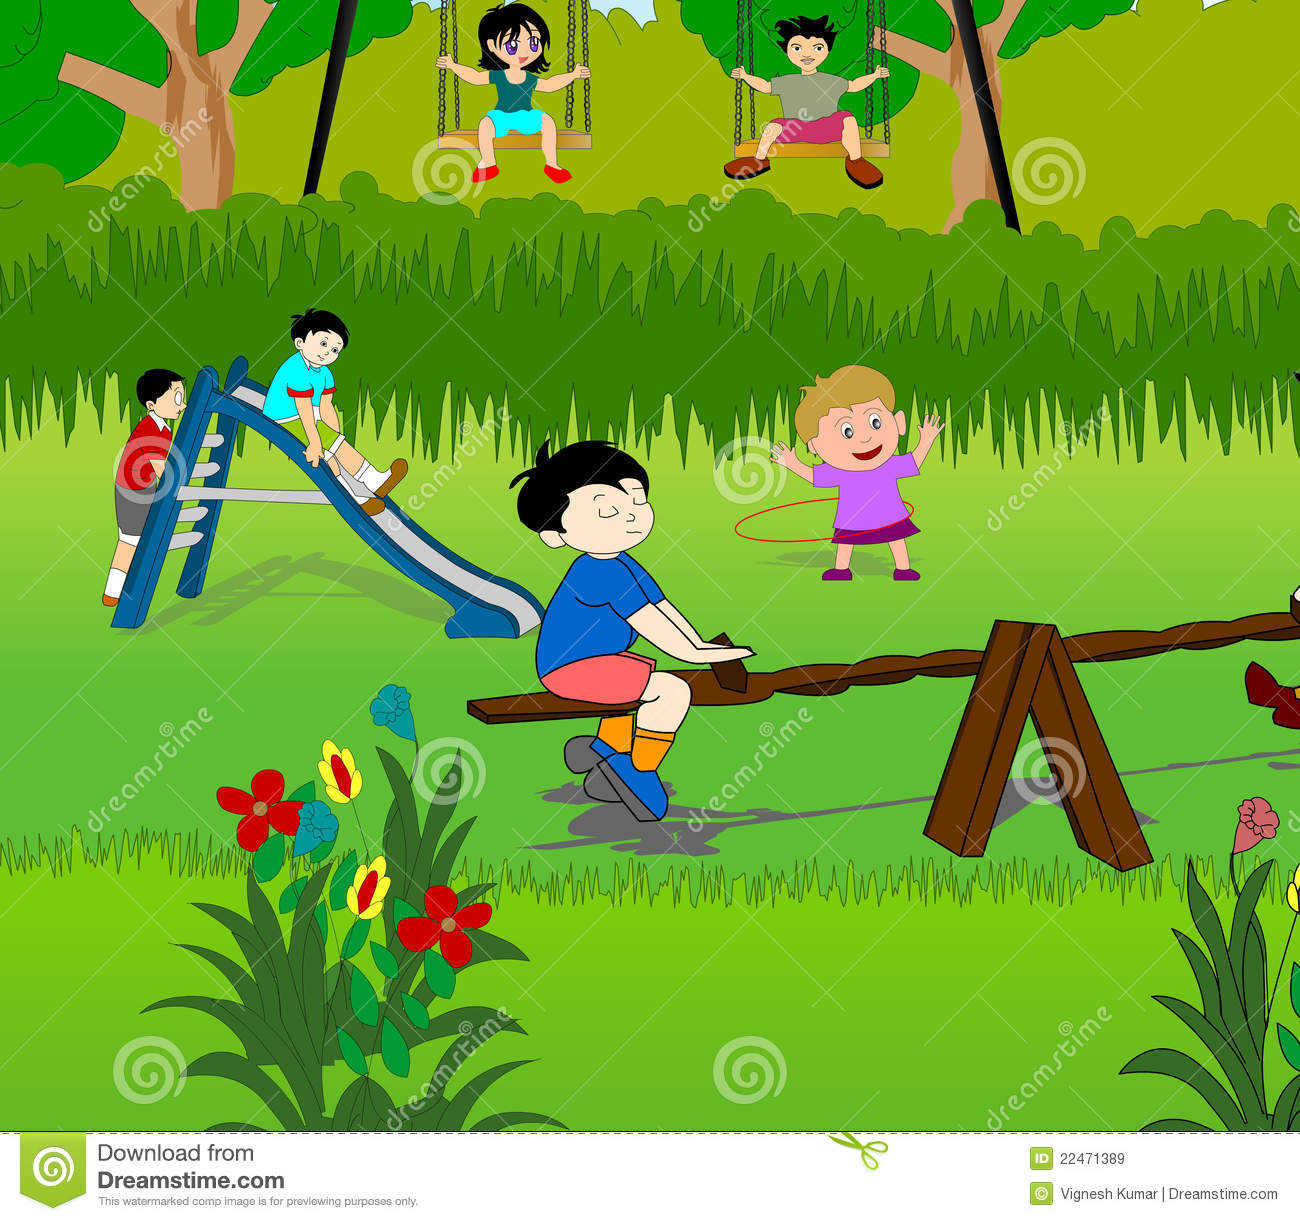 Play Park Clipart Displaying 19 Gallery Images For Play Park Clipart